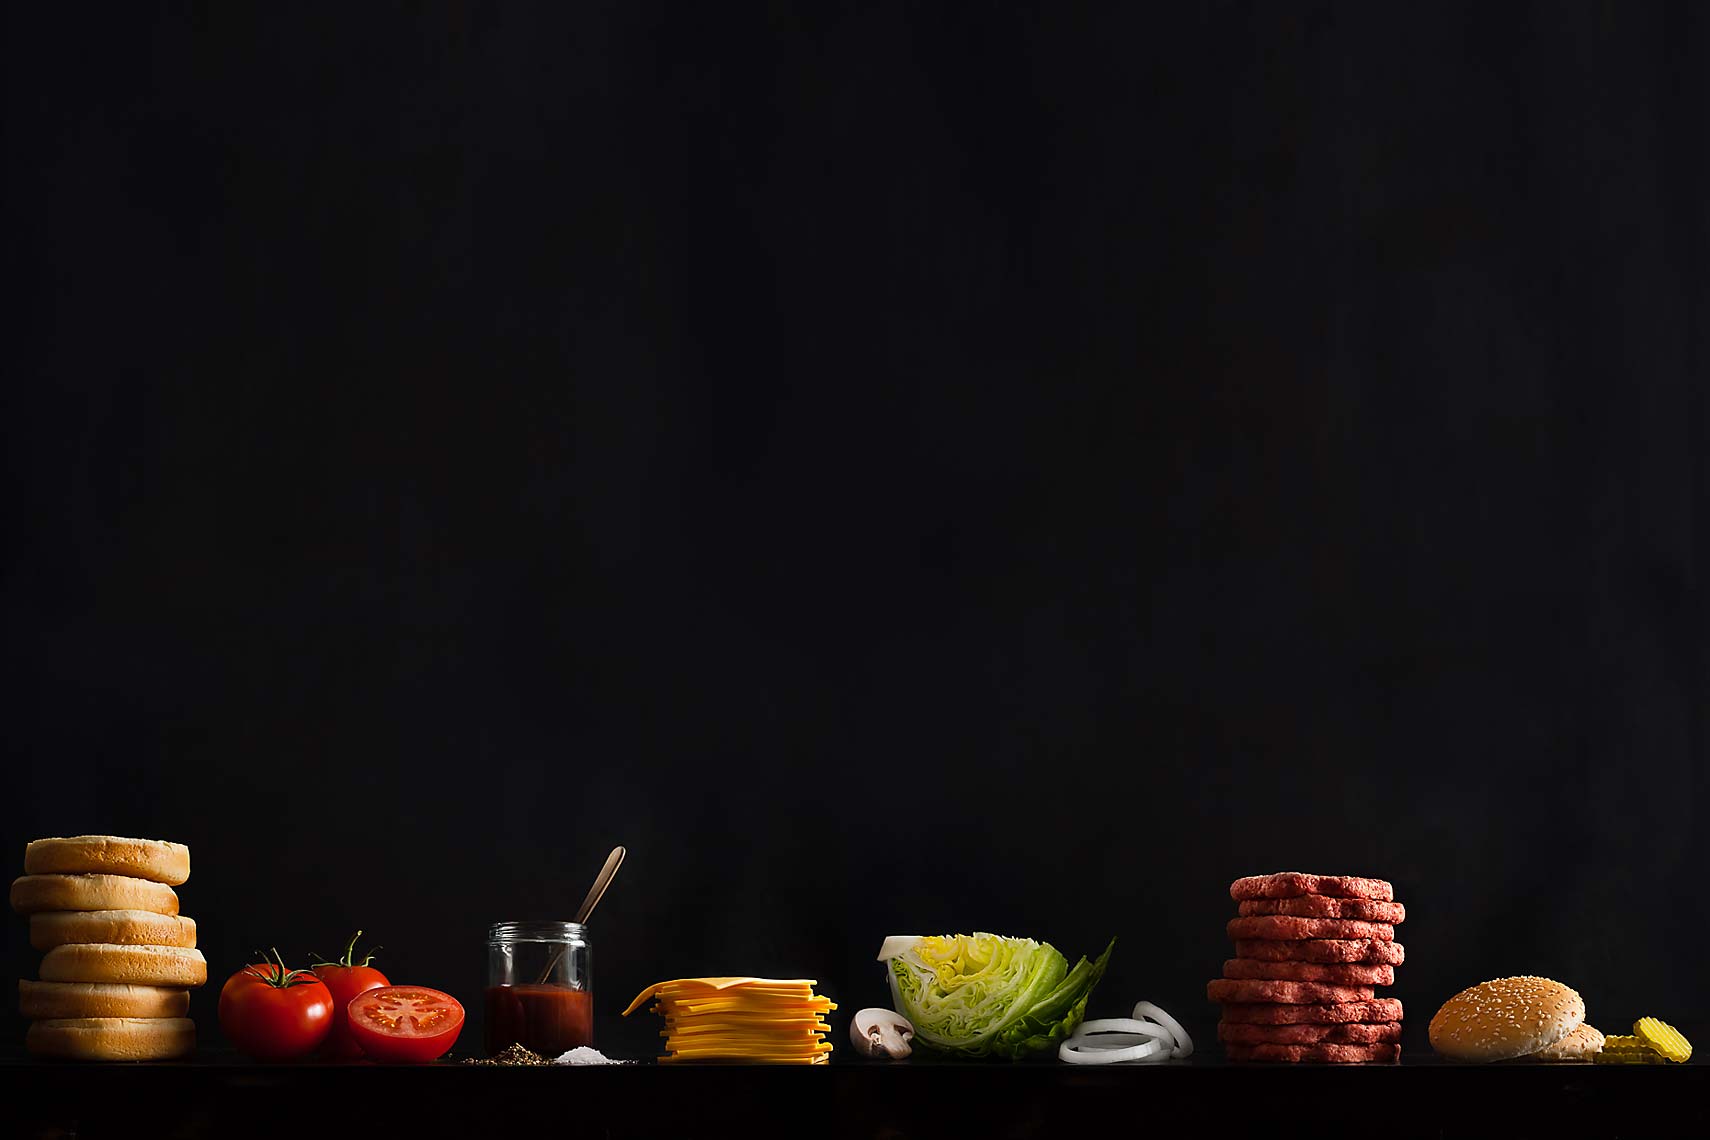 Burger King Raw Ingredients Lined Up On A Dark Background